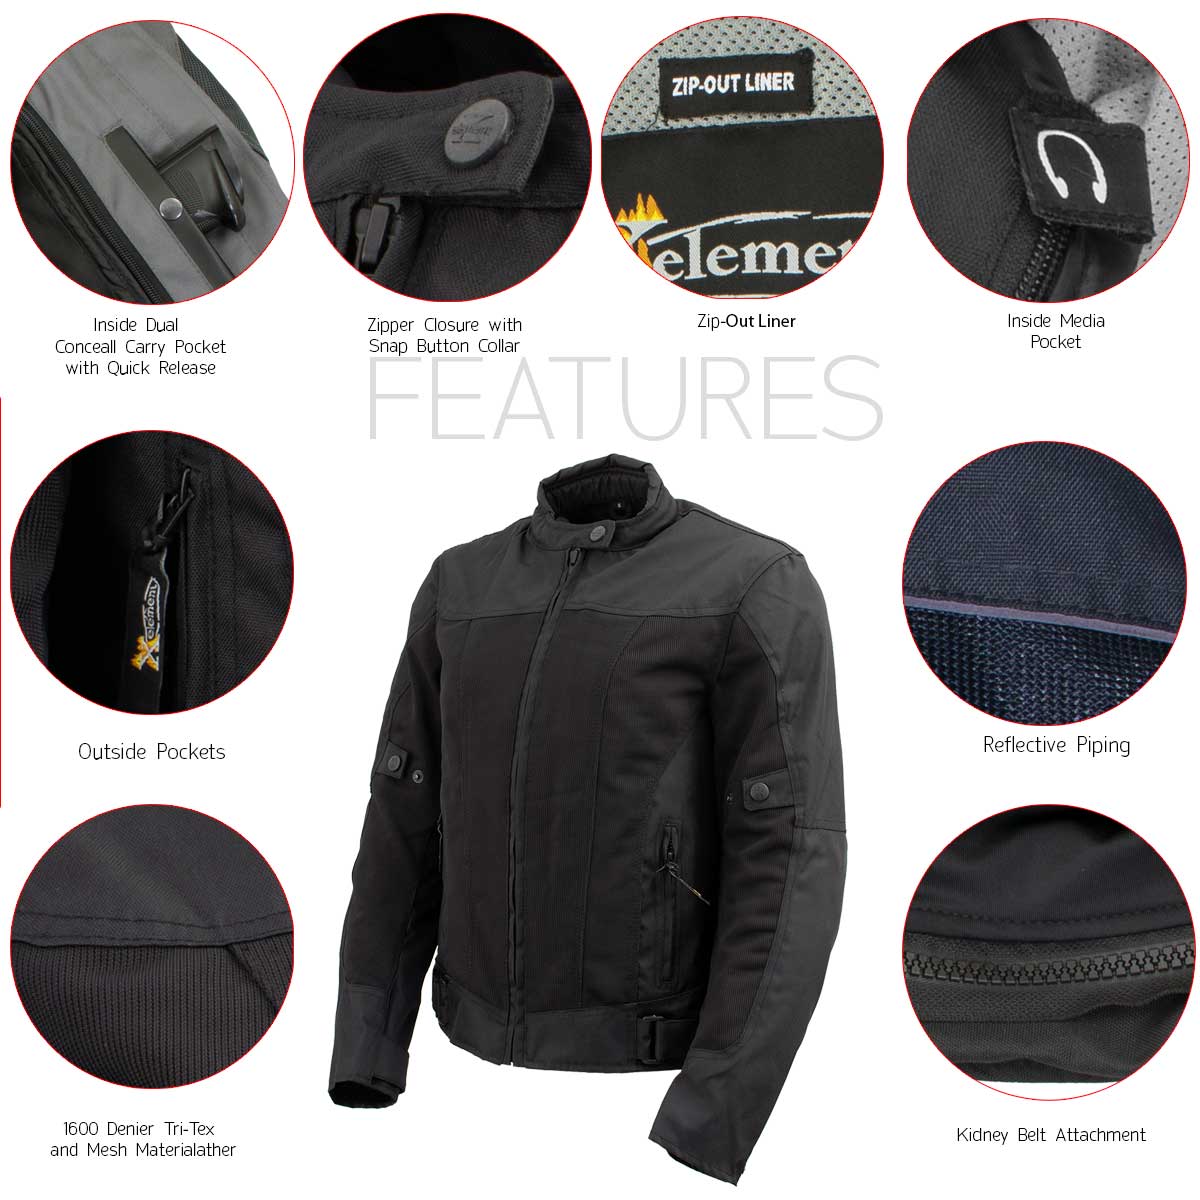 Xelement XS22012 Women's 'Shade' Black Textile and Mesh Scooter Motorcycle Biker Jacket with X-Armor